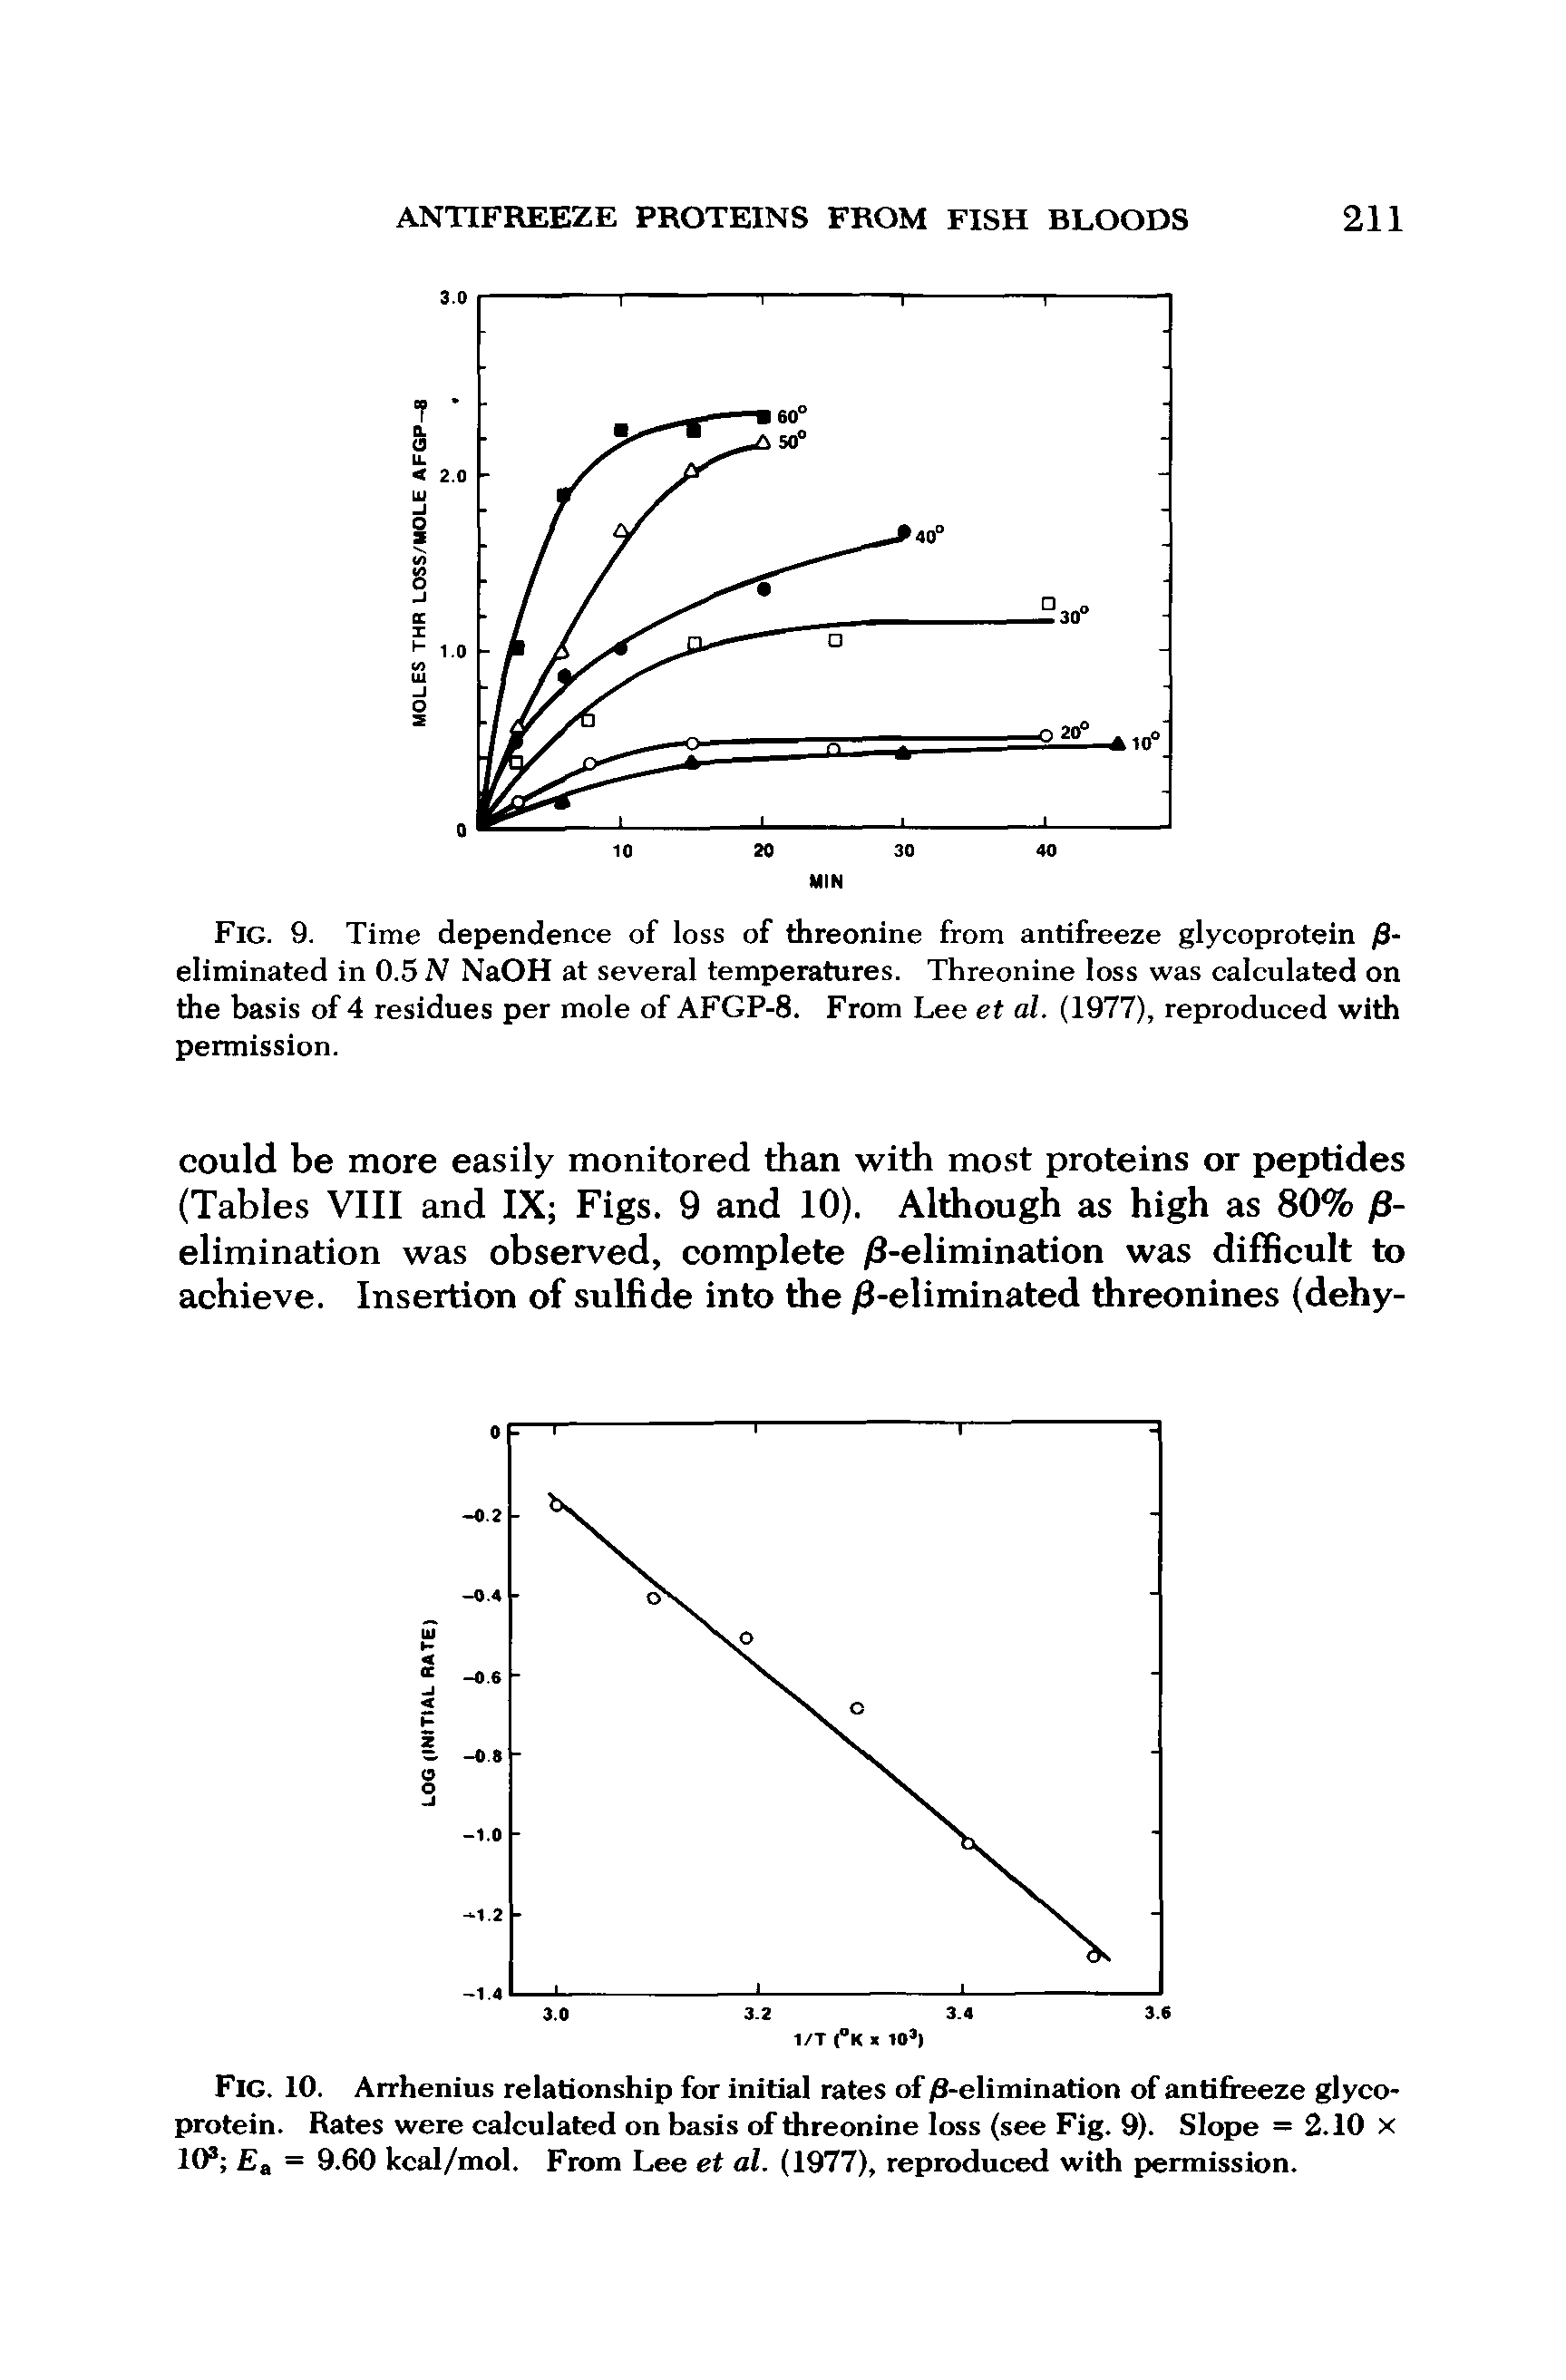 Fig. 9. Time dependence of loss of threonine from antifreeze glycoprotein /8-eliminated in 0.5 N NaOH at several temperatures. Threonine loss was calculated on the basis of 4 residues per mole of AFGP-8. From Lee et al. (1977), reproduced with permission.